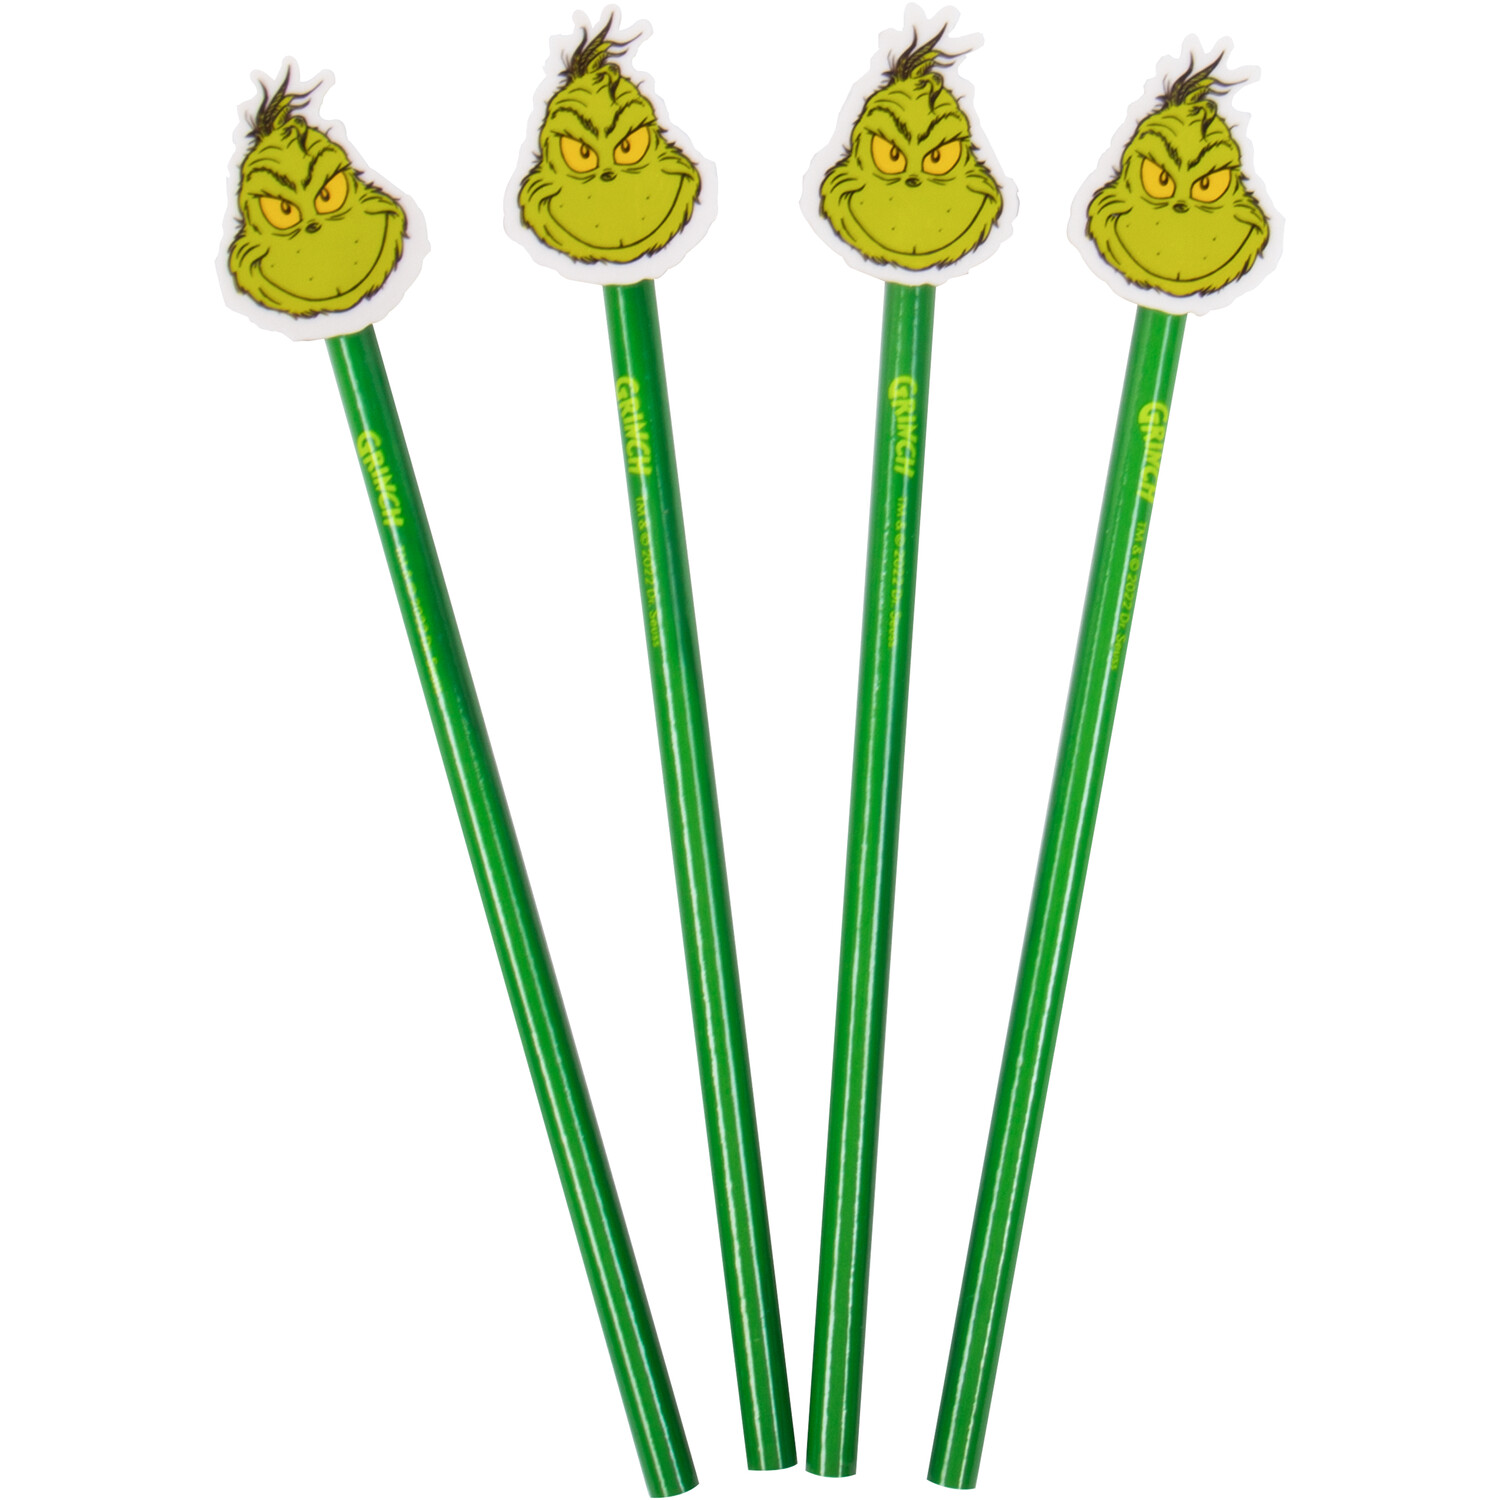 Set of Four The Grinch Pencils and Erasers Image 1